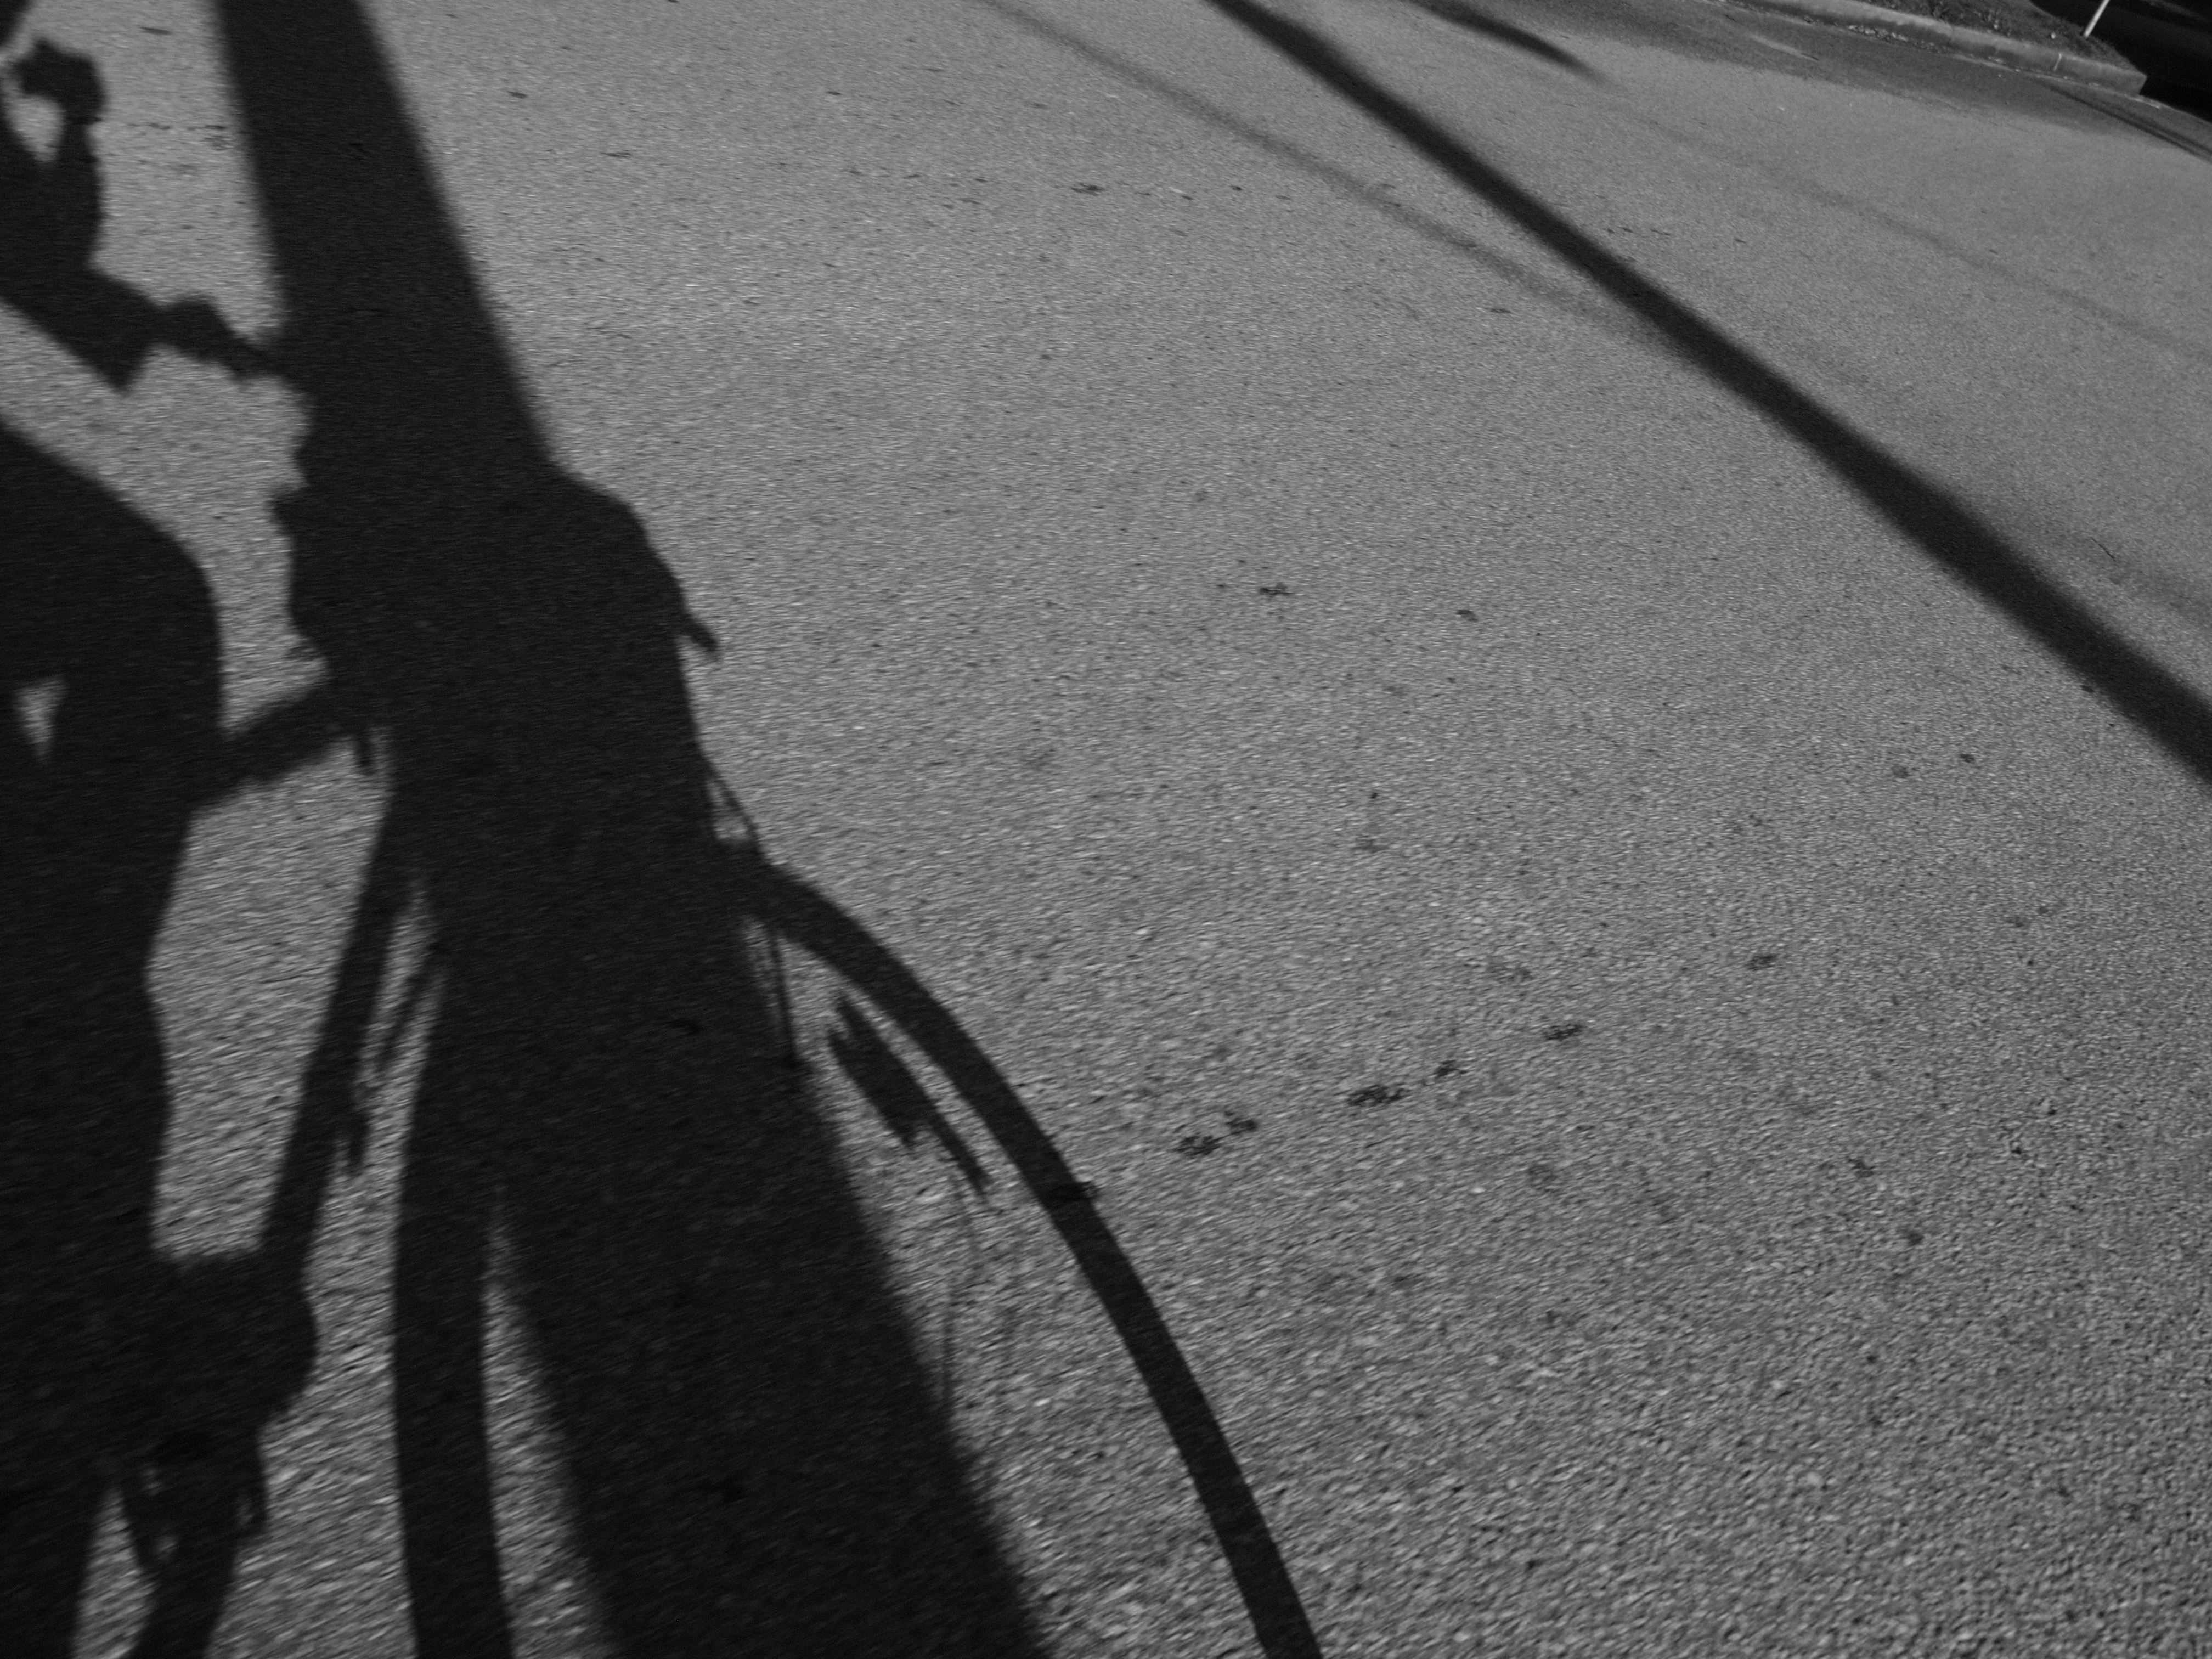 Bicycling to work epl1-vancouver-14-42mm-20130415-p4152128 photo